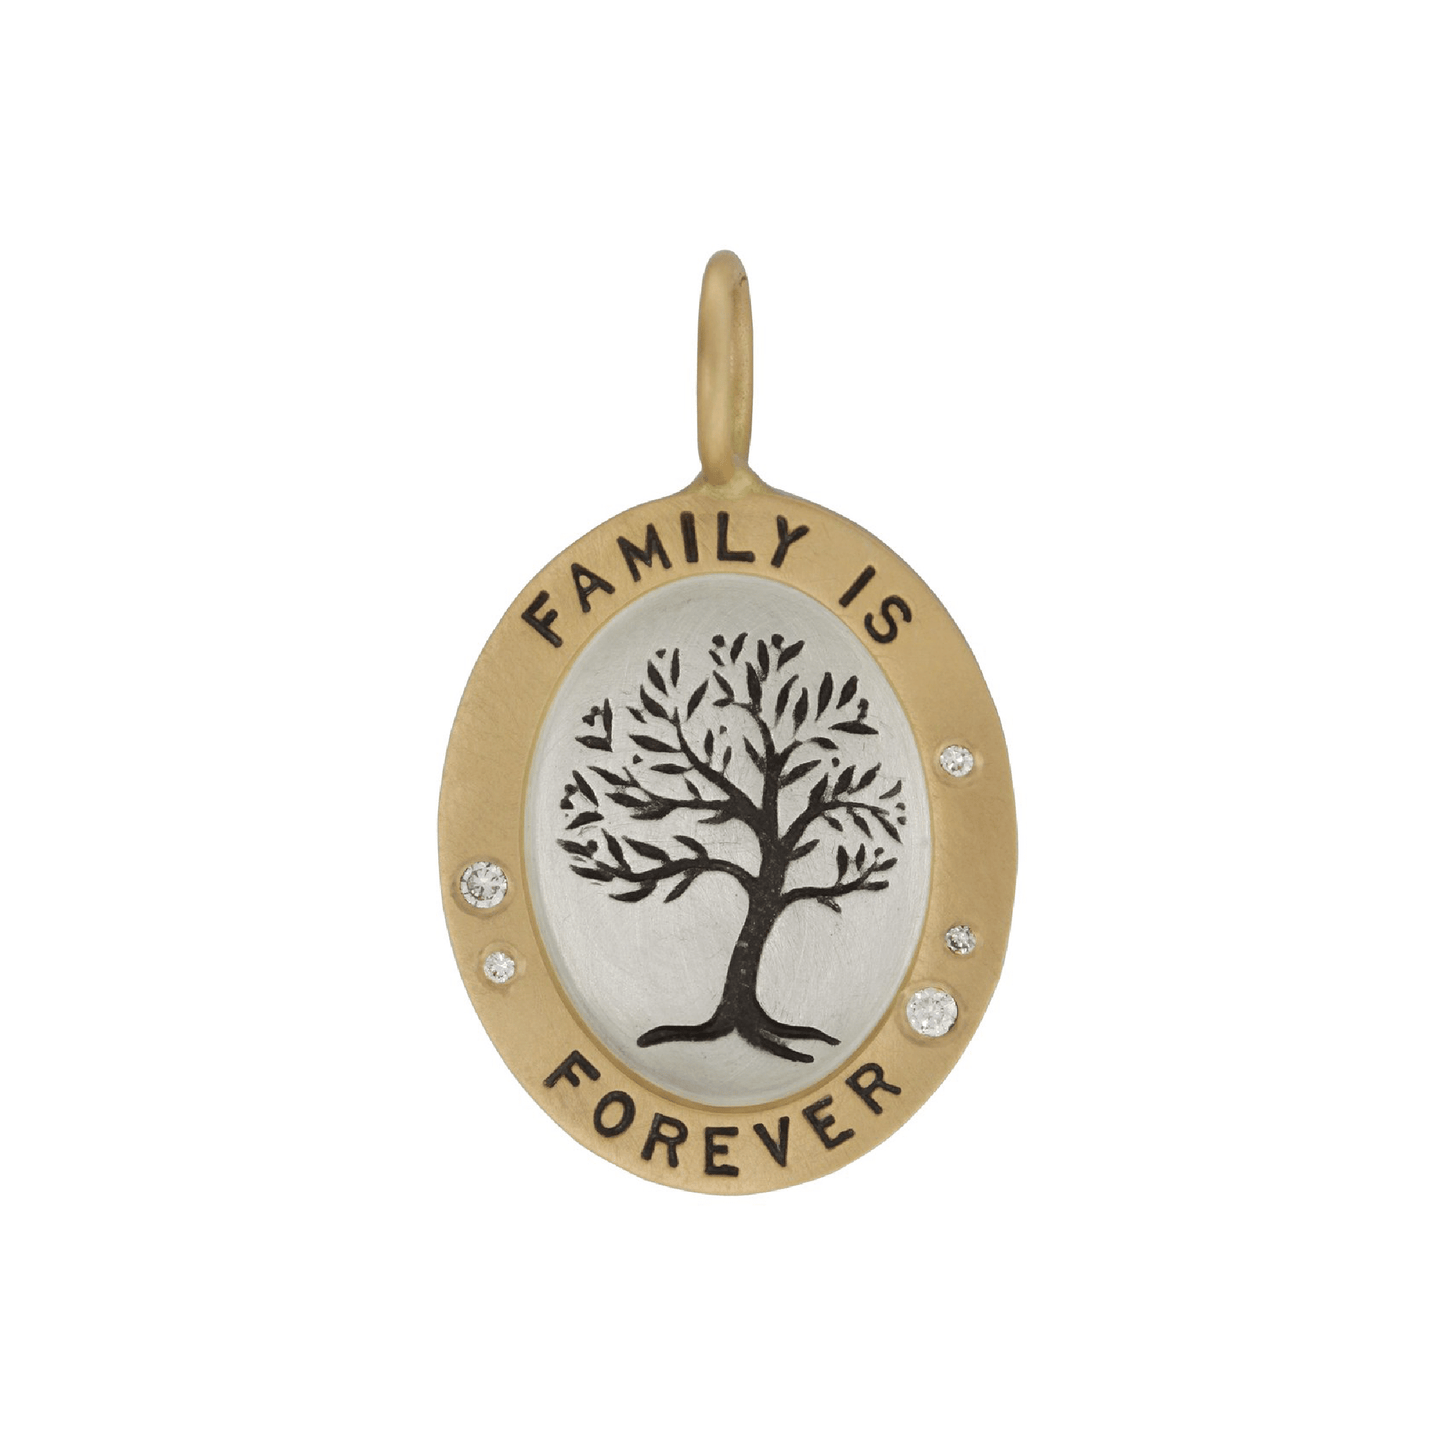 CHM Gold & Silver "Family is Forever" Tree Charm with Diamonds